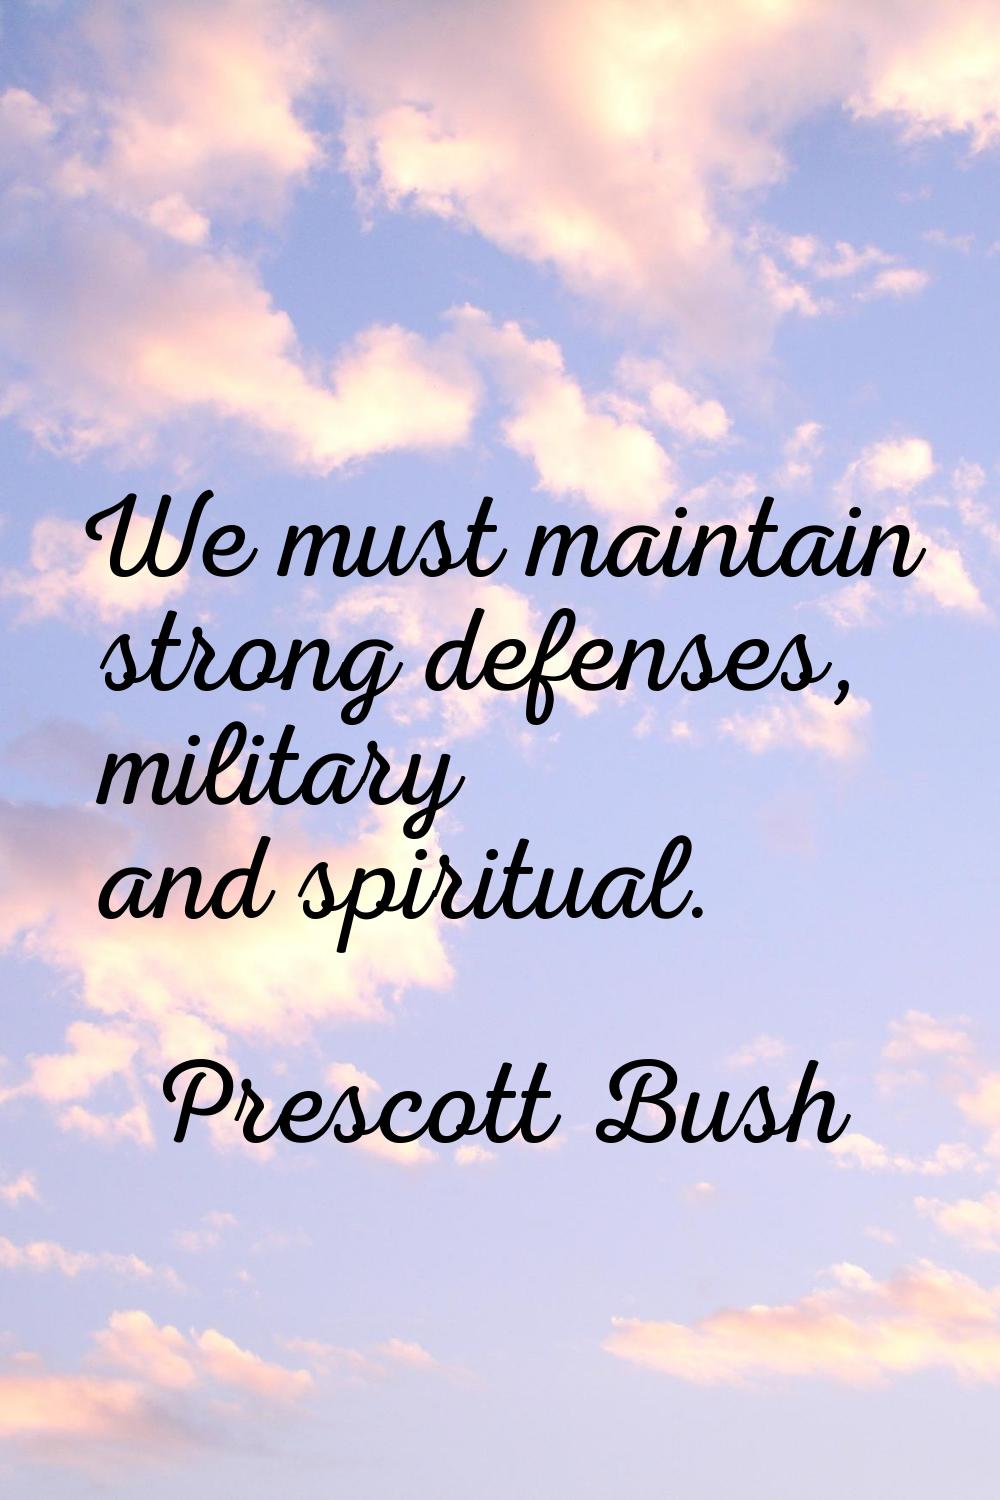 We must maintain strong defenses, military and spiritual.